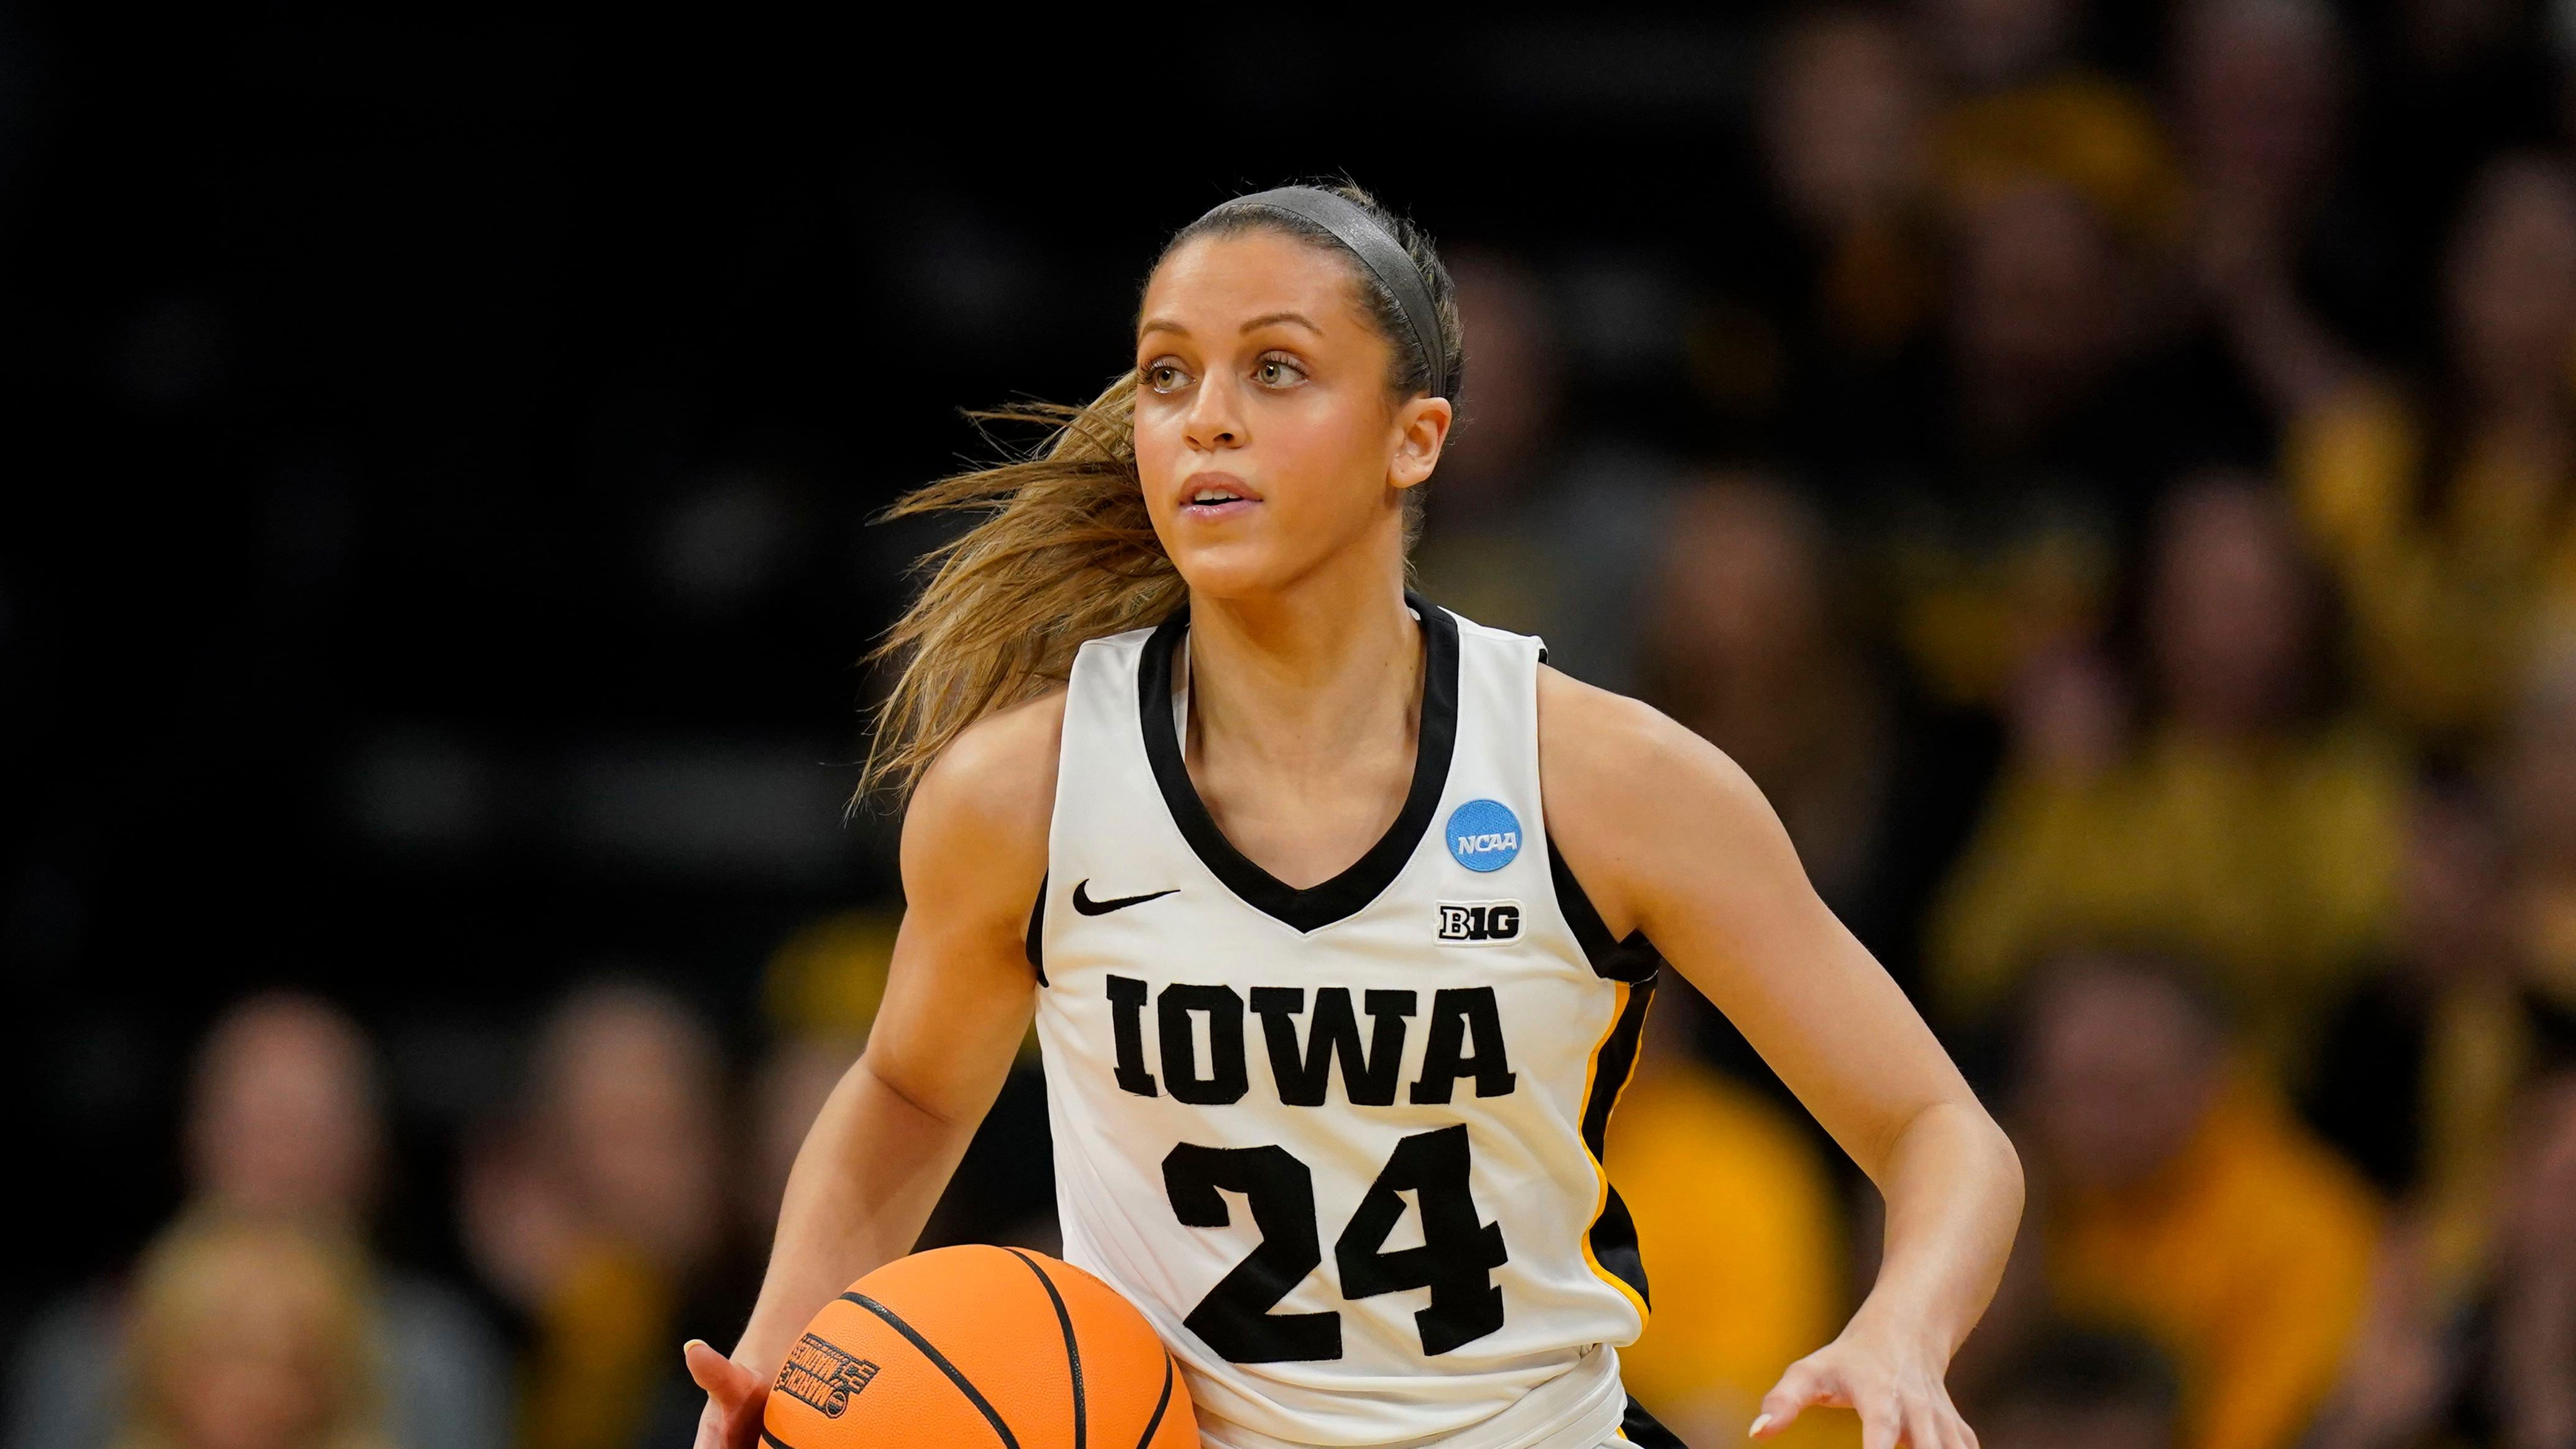 Fans can meet Iowa Hawkeye Gabbie Marshall at upcoming event in Riverside